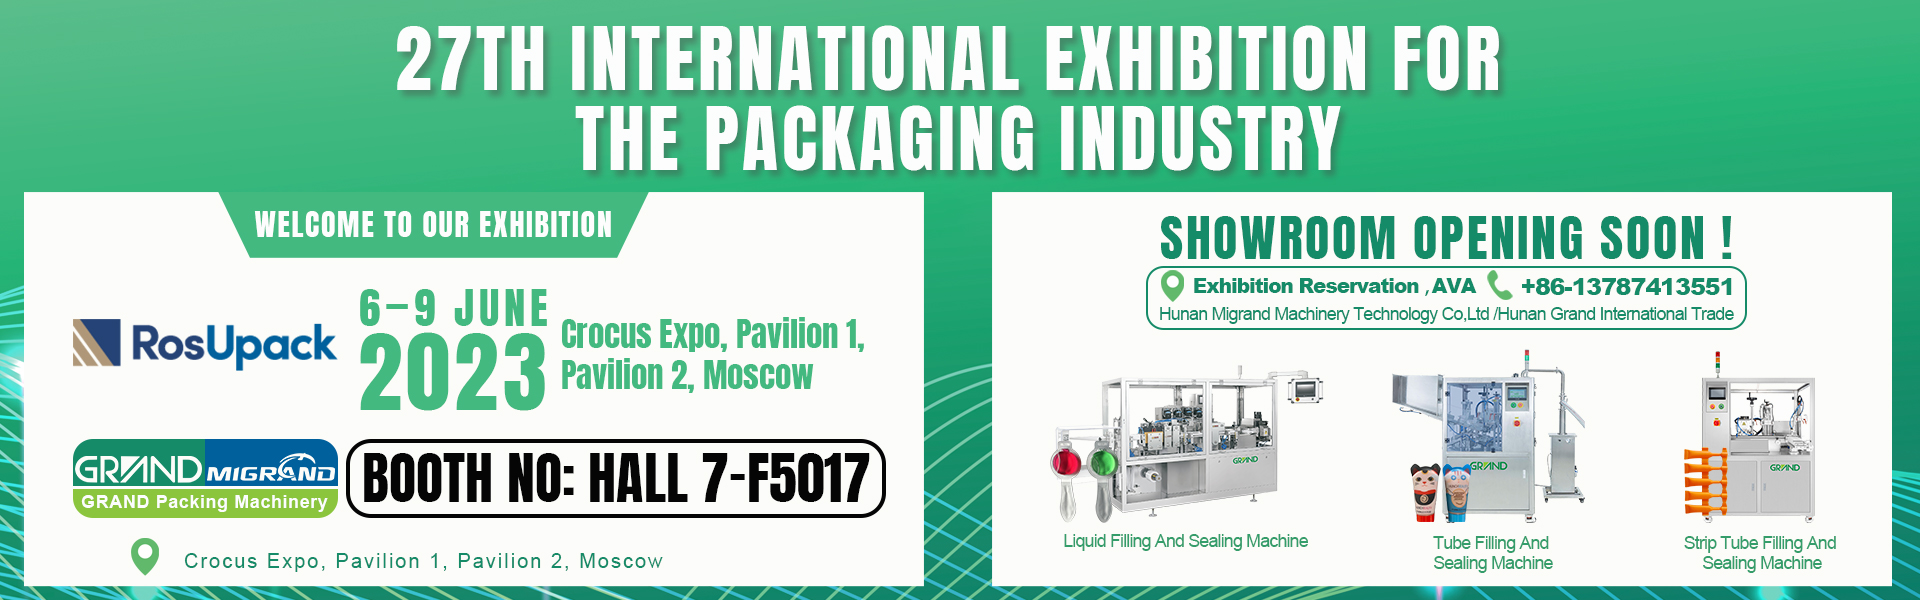 Grand-Packing exhibition for the packaging industry